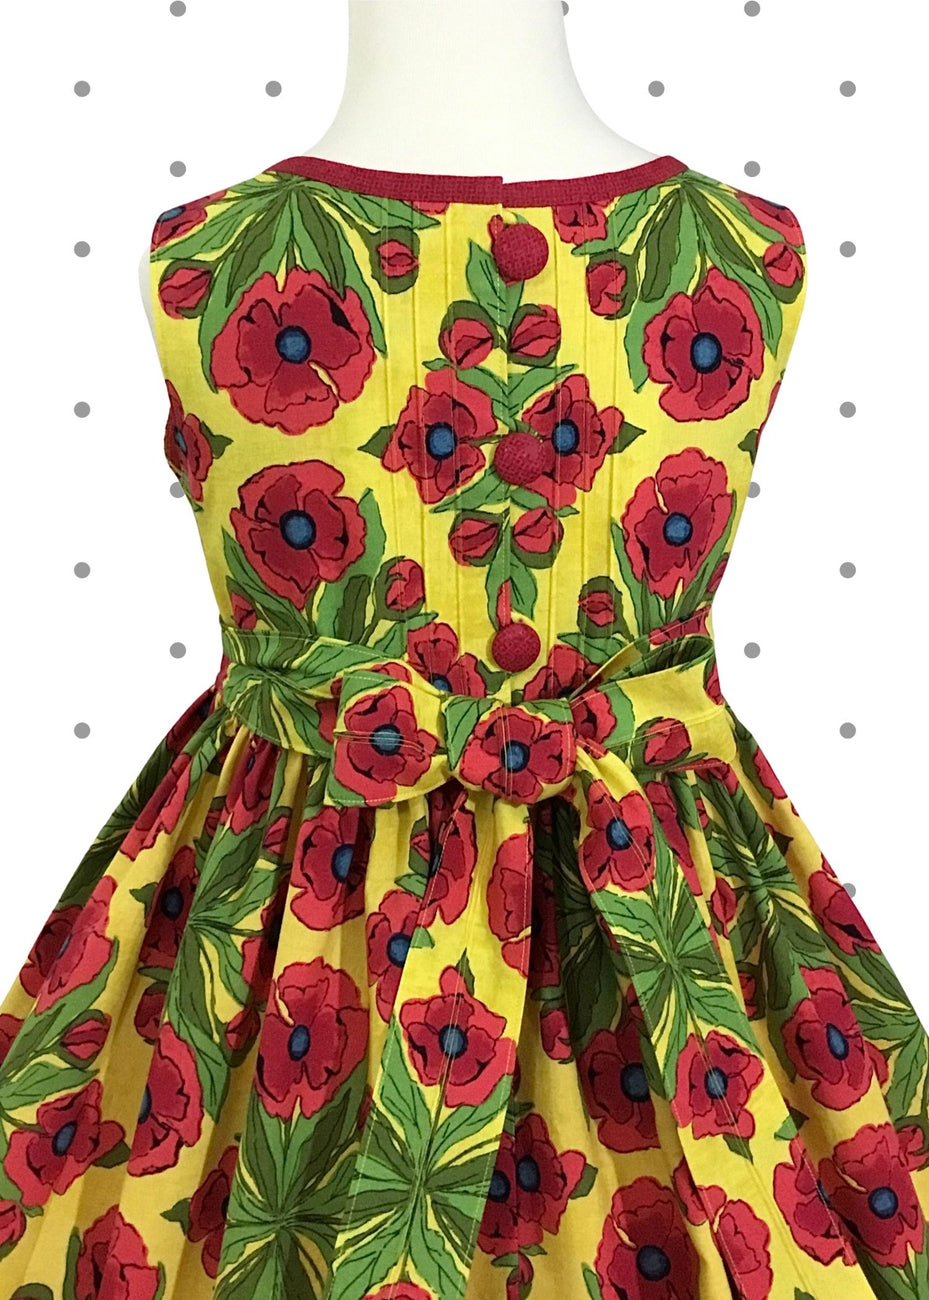 Poppin’ Poppies ~ Size 5